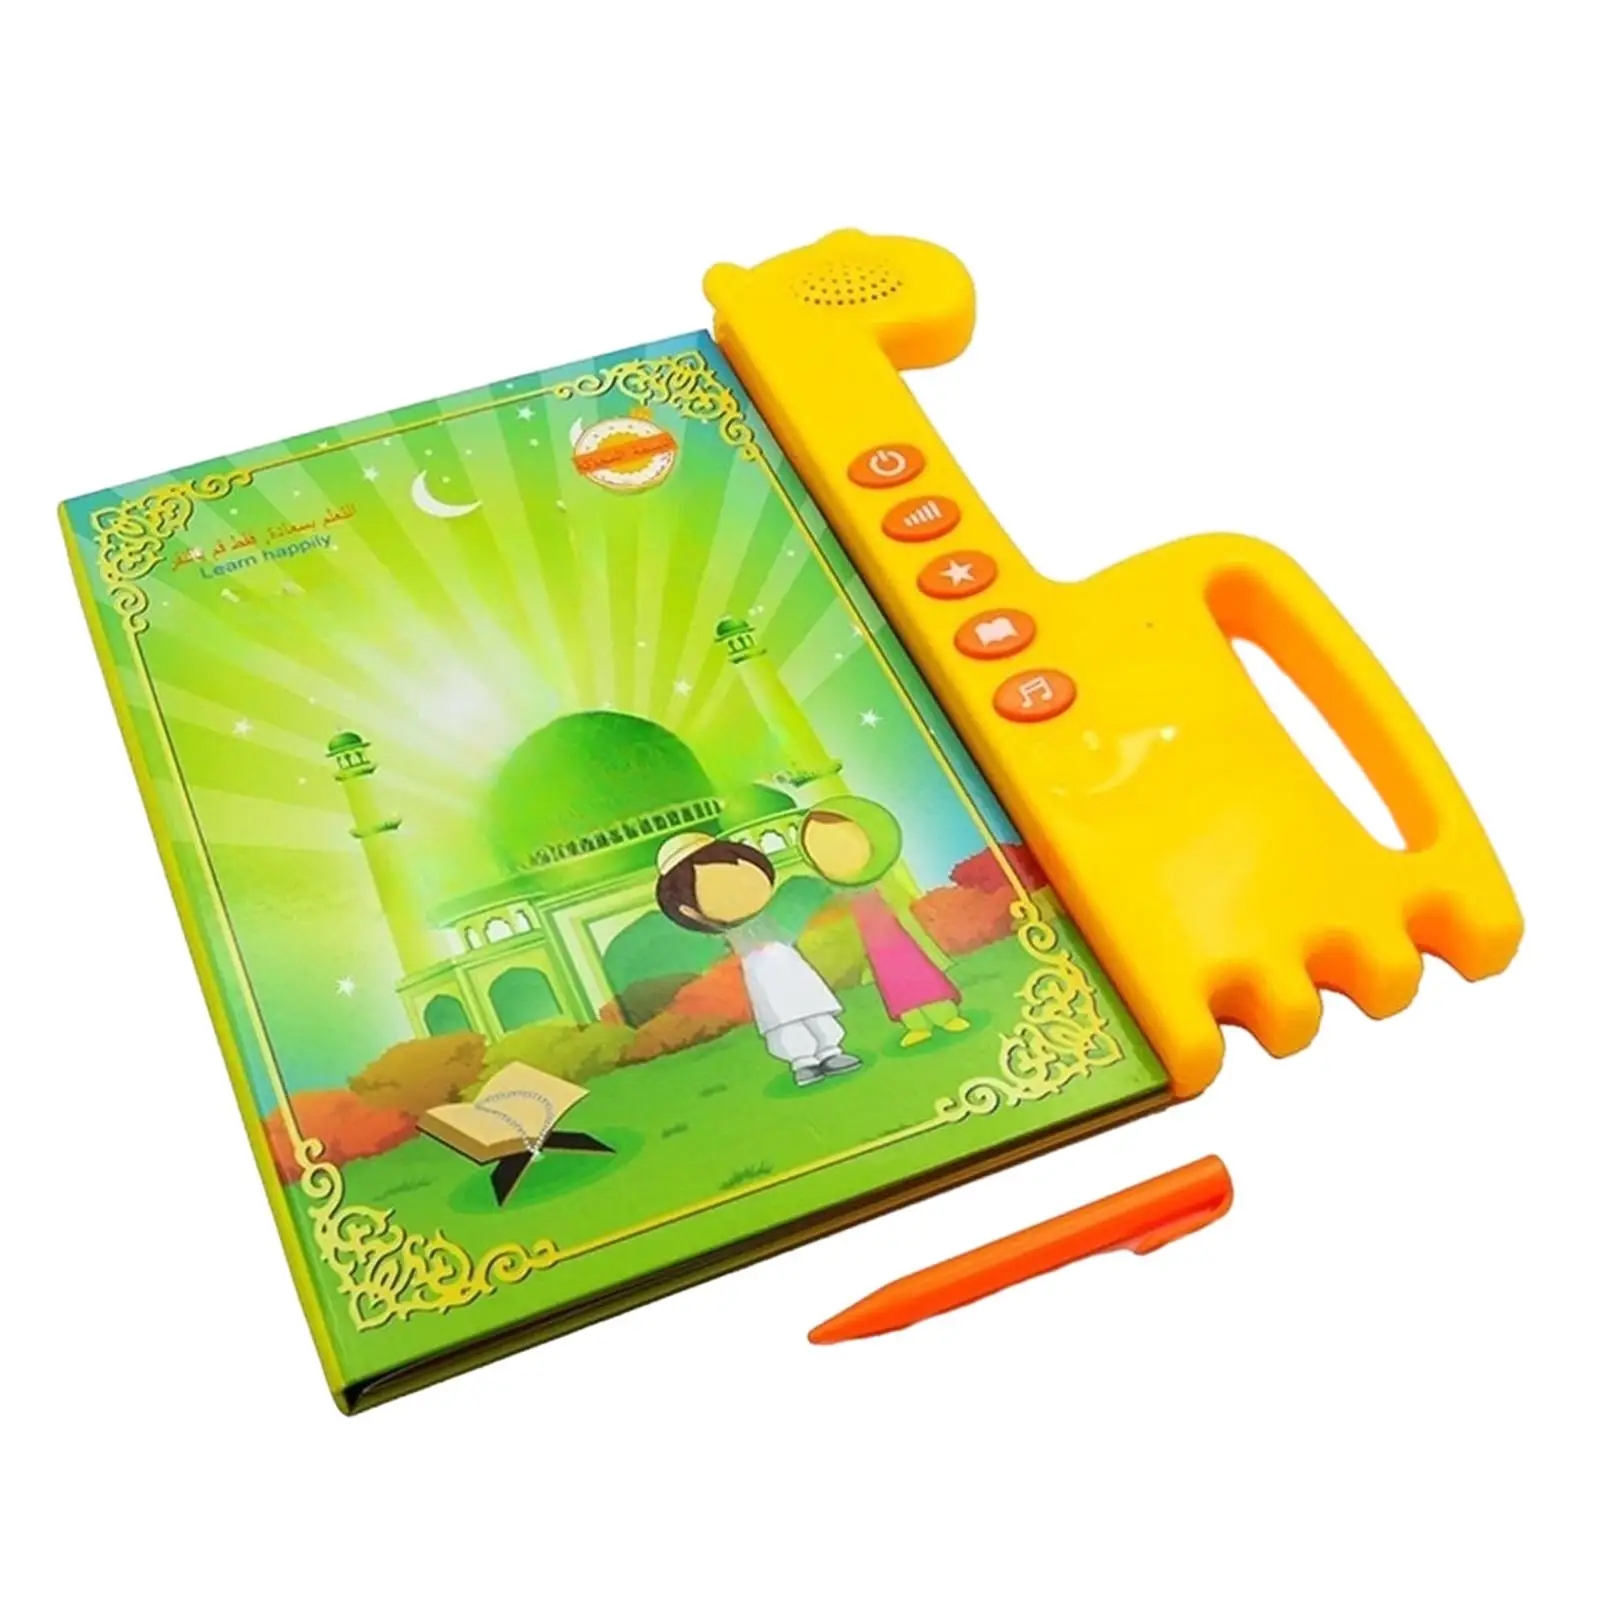 Arabic Learning Book Teaching Aids Portable Audio Book Developmental Toys Multifunctional Educational Toy for Kids Gift Children